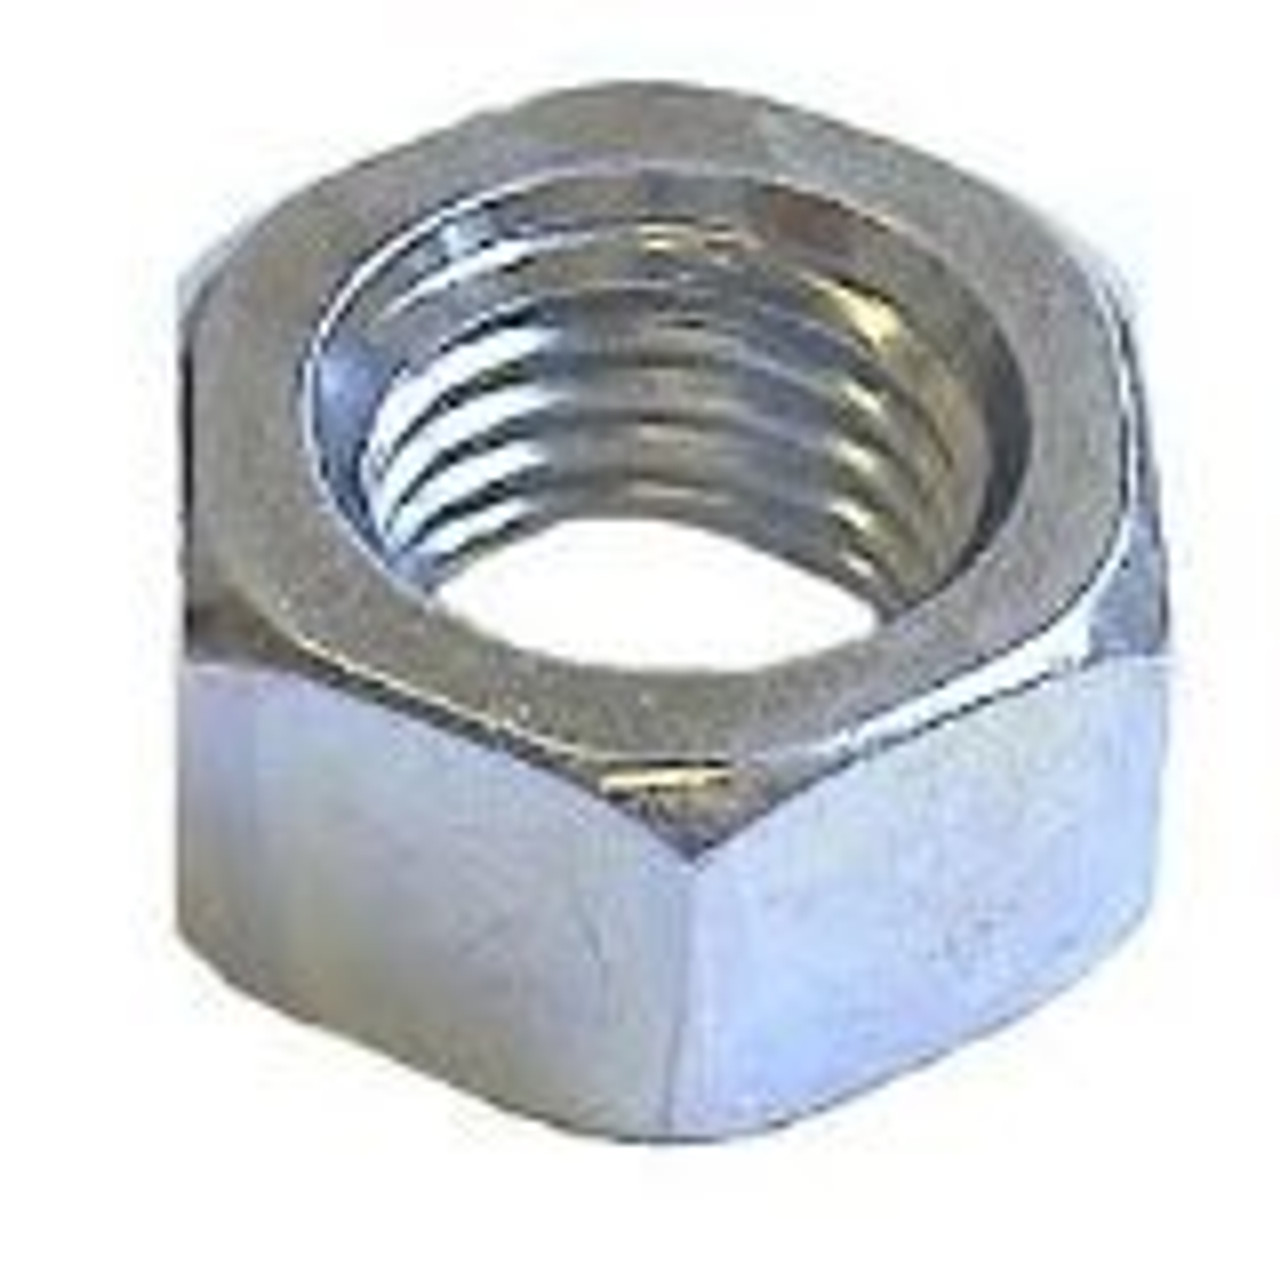 M8 Full Nut (20 Pack) 8mm A2 Stainless Steel Hex Hexagon Nuts Free UK Delivery